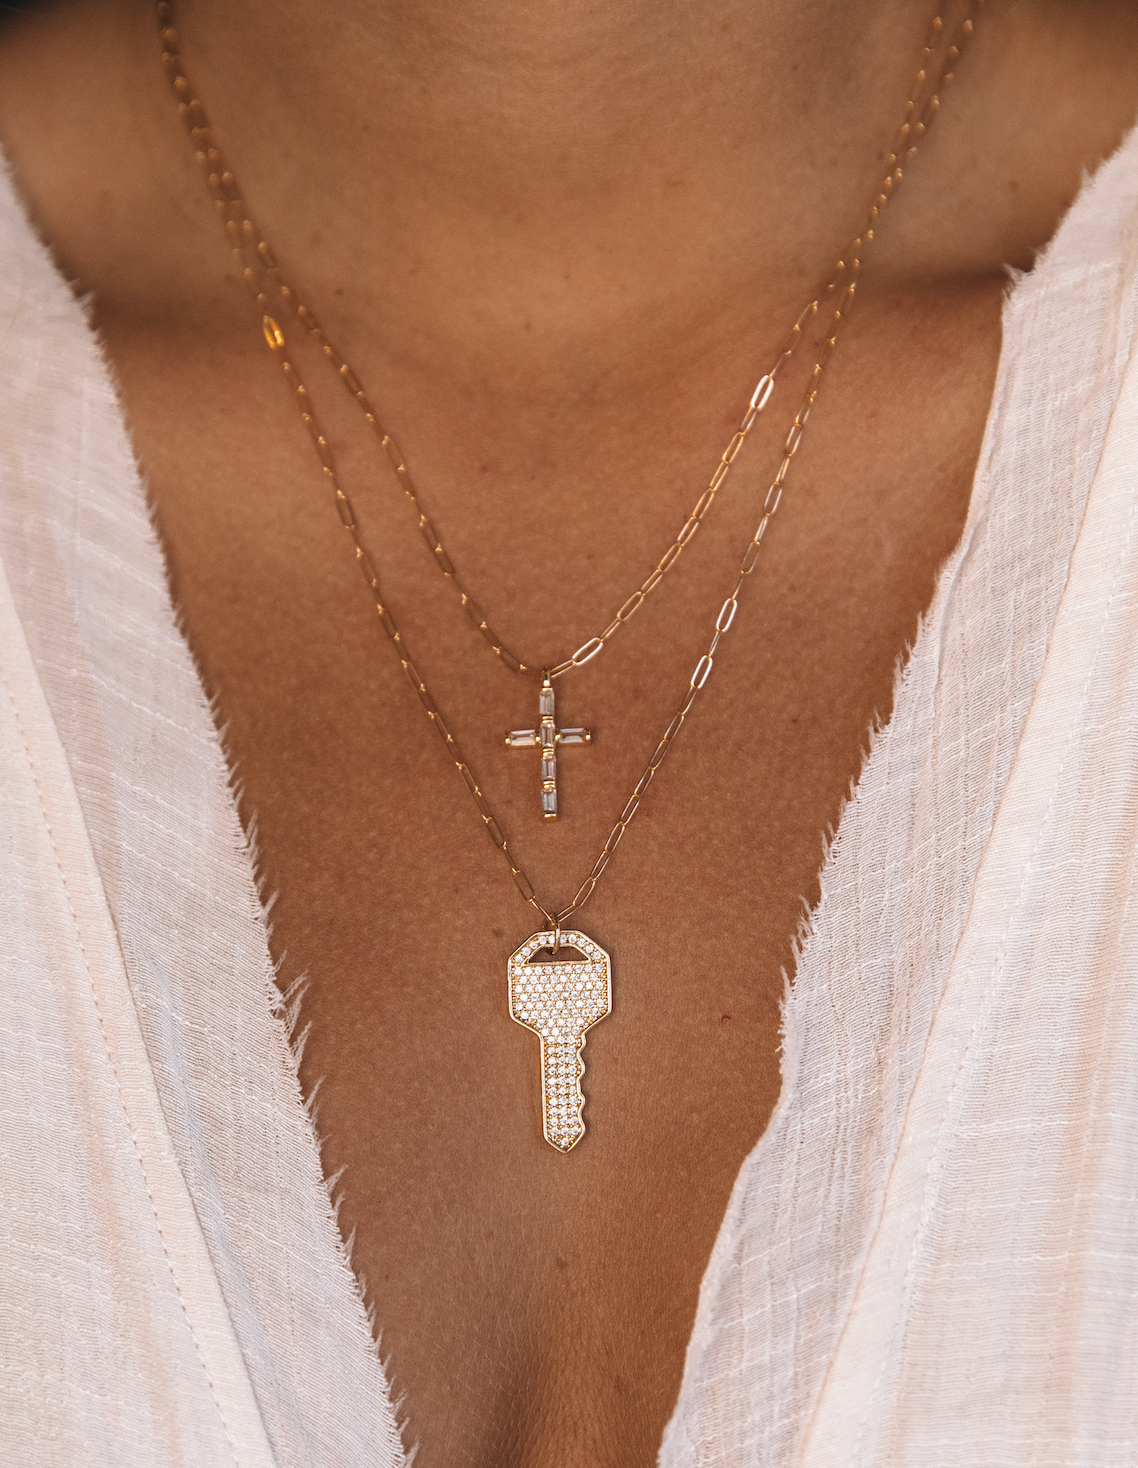 The Key Necklace